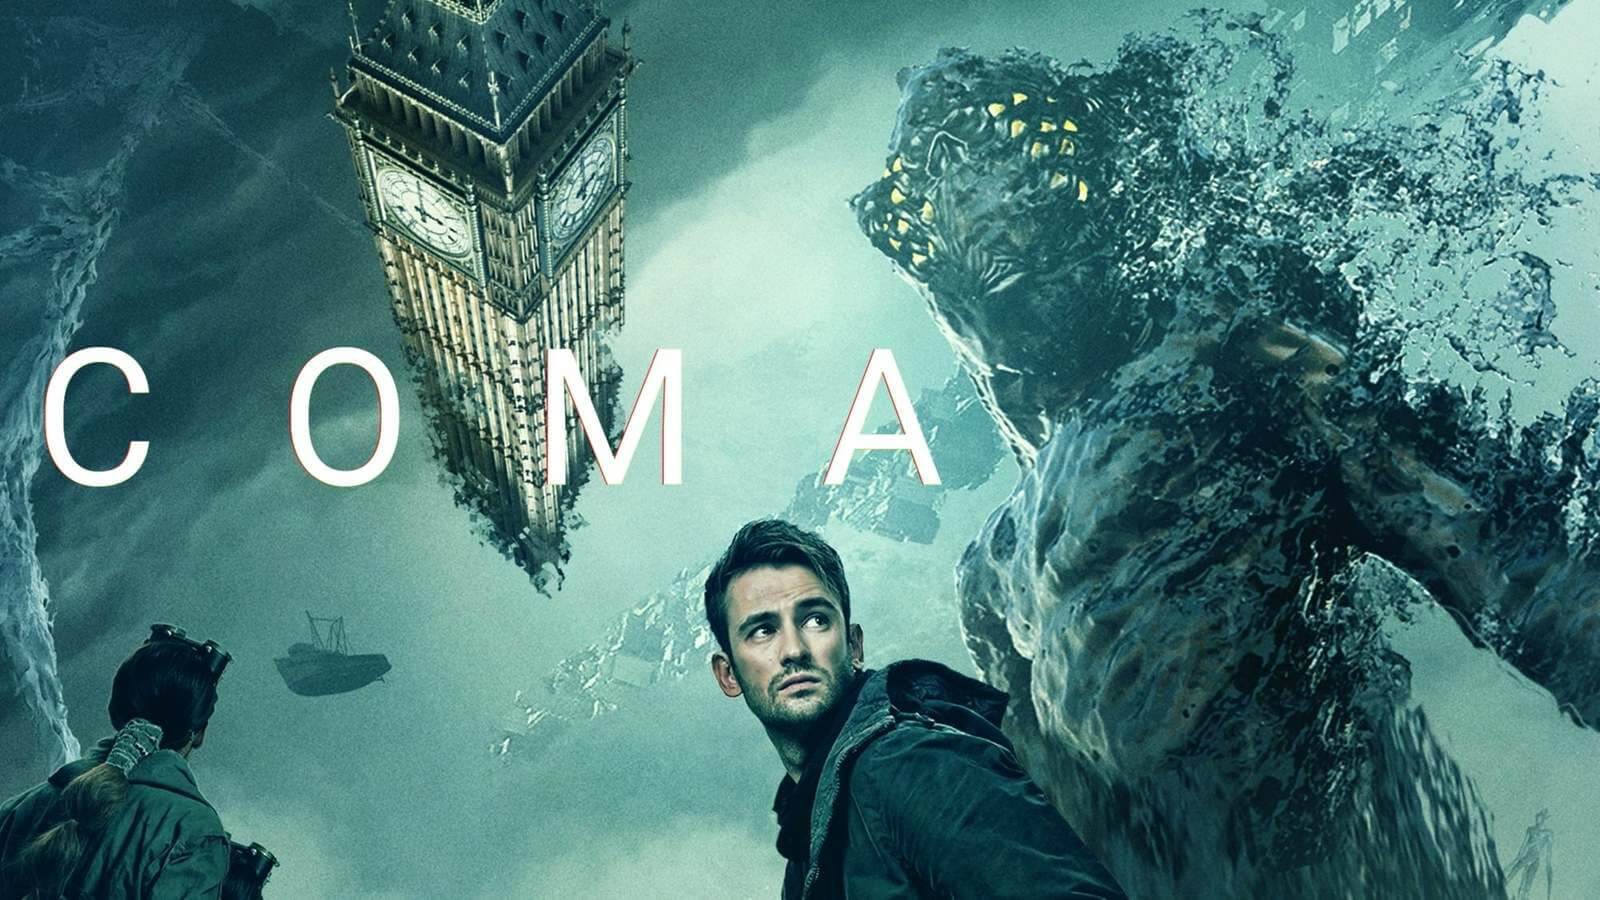 Download Coma (2019) (Dual Audio) Blu-Ray Movie - Techoffical.com